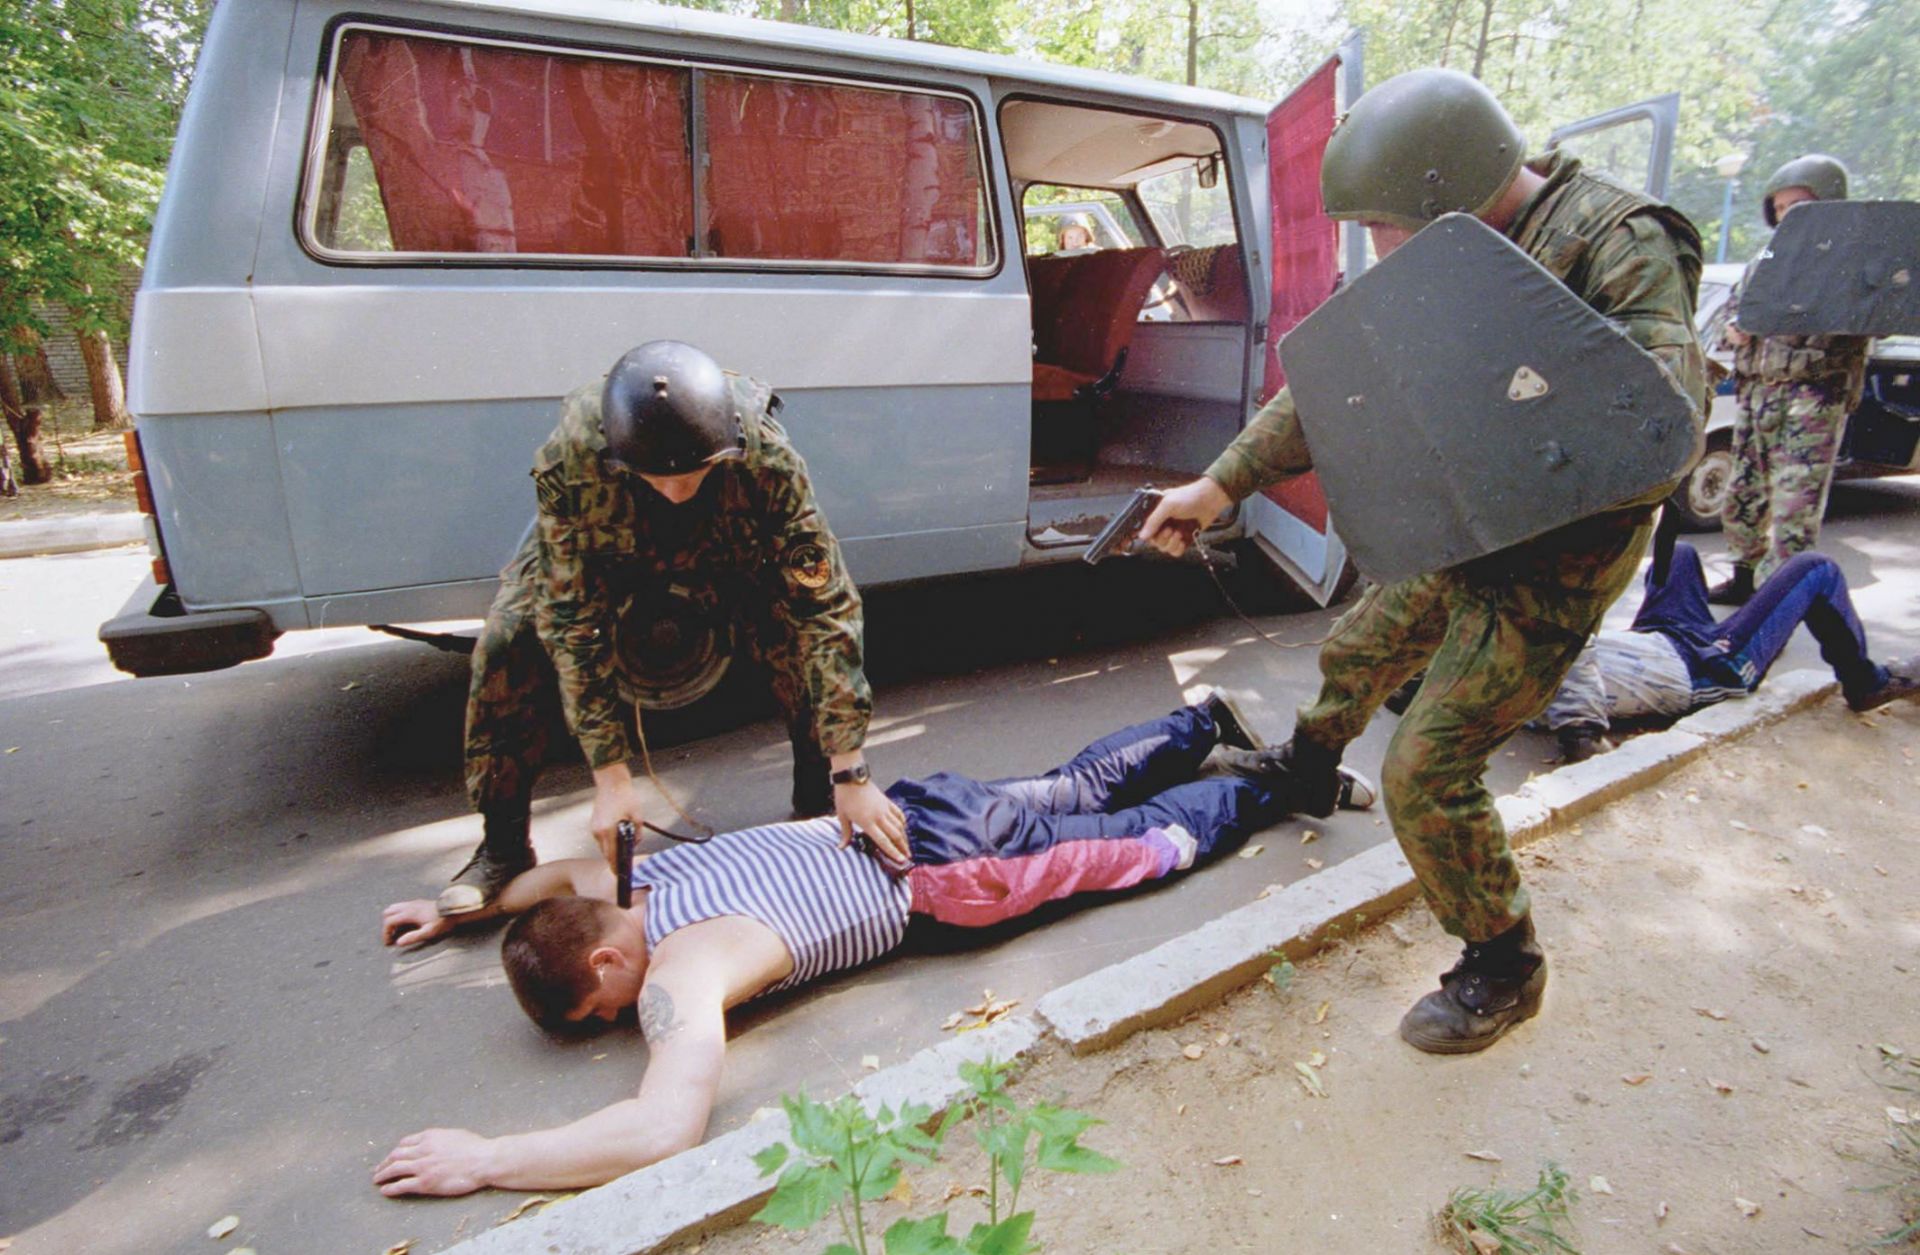 Moscow special forces police arrest a suspected mafia car thief, August 24, 1997.